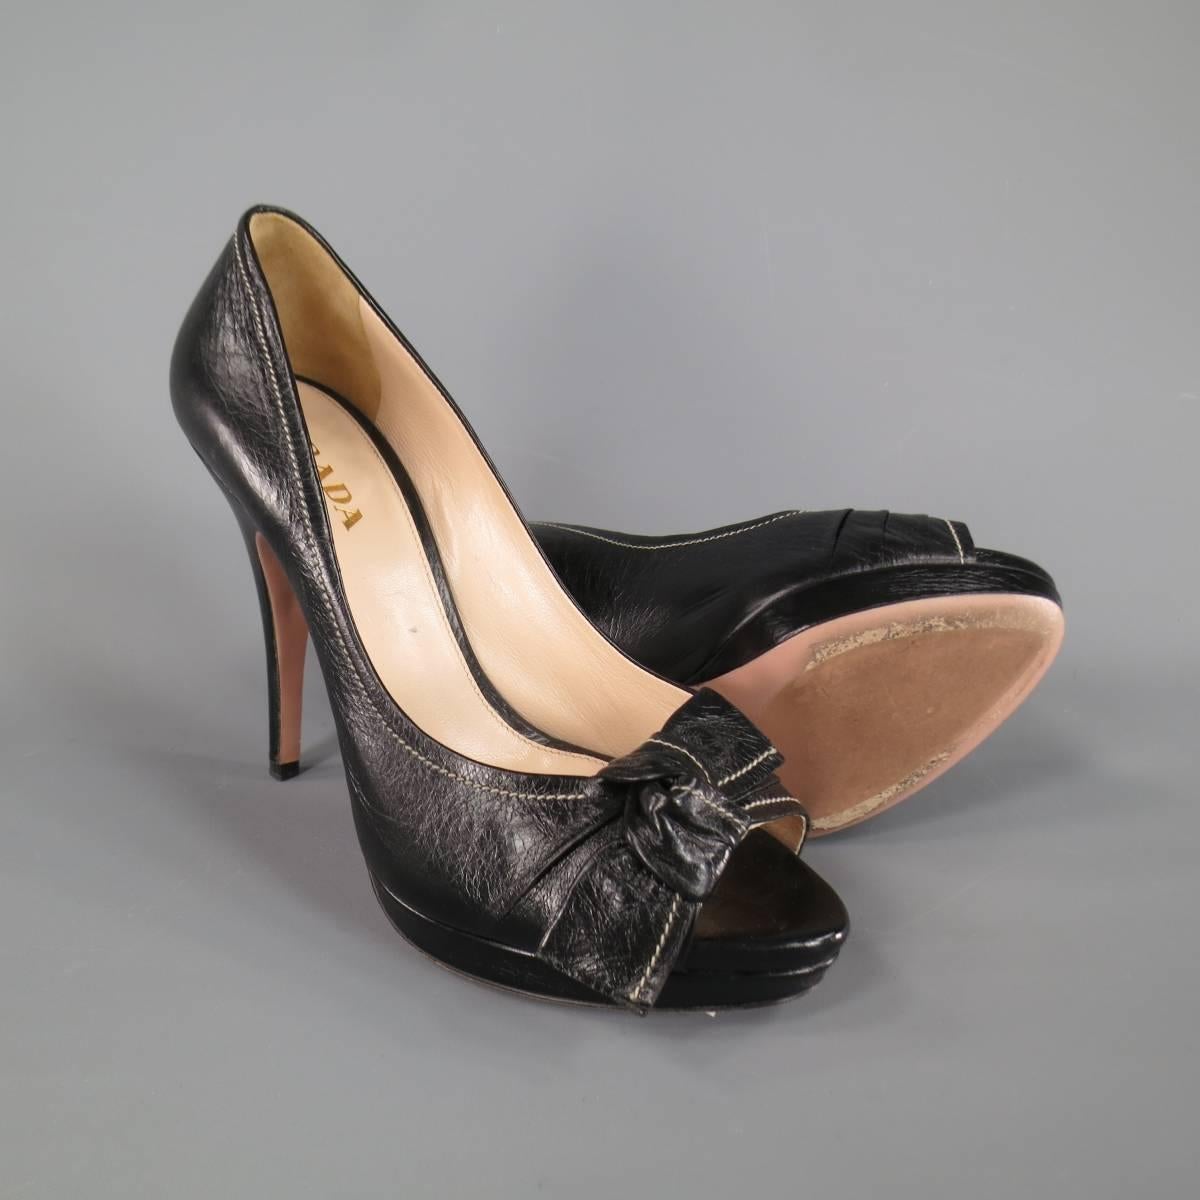 Fabulous PRADA pumps in black leather with a peep toe, covered stiletto heel, low platform, contrast stitching, and knotted bow detail. Made in Italy.
 
Excellent Pre-Owned Condition.
Marked: IT 39
 
Heel: 4.75 in.
Platform: 0.75 in.